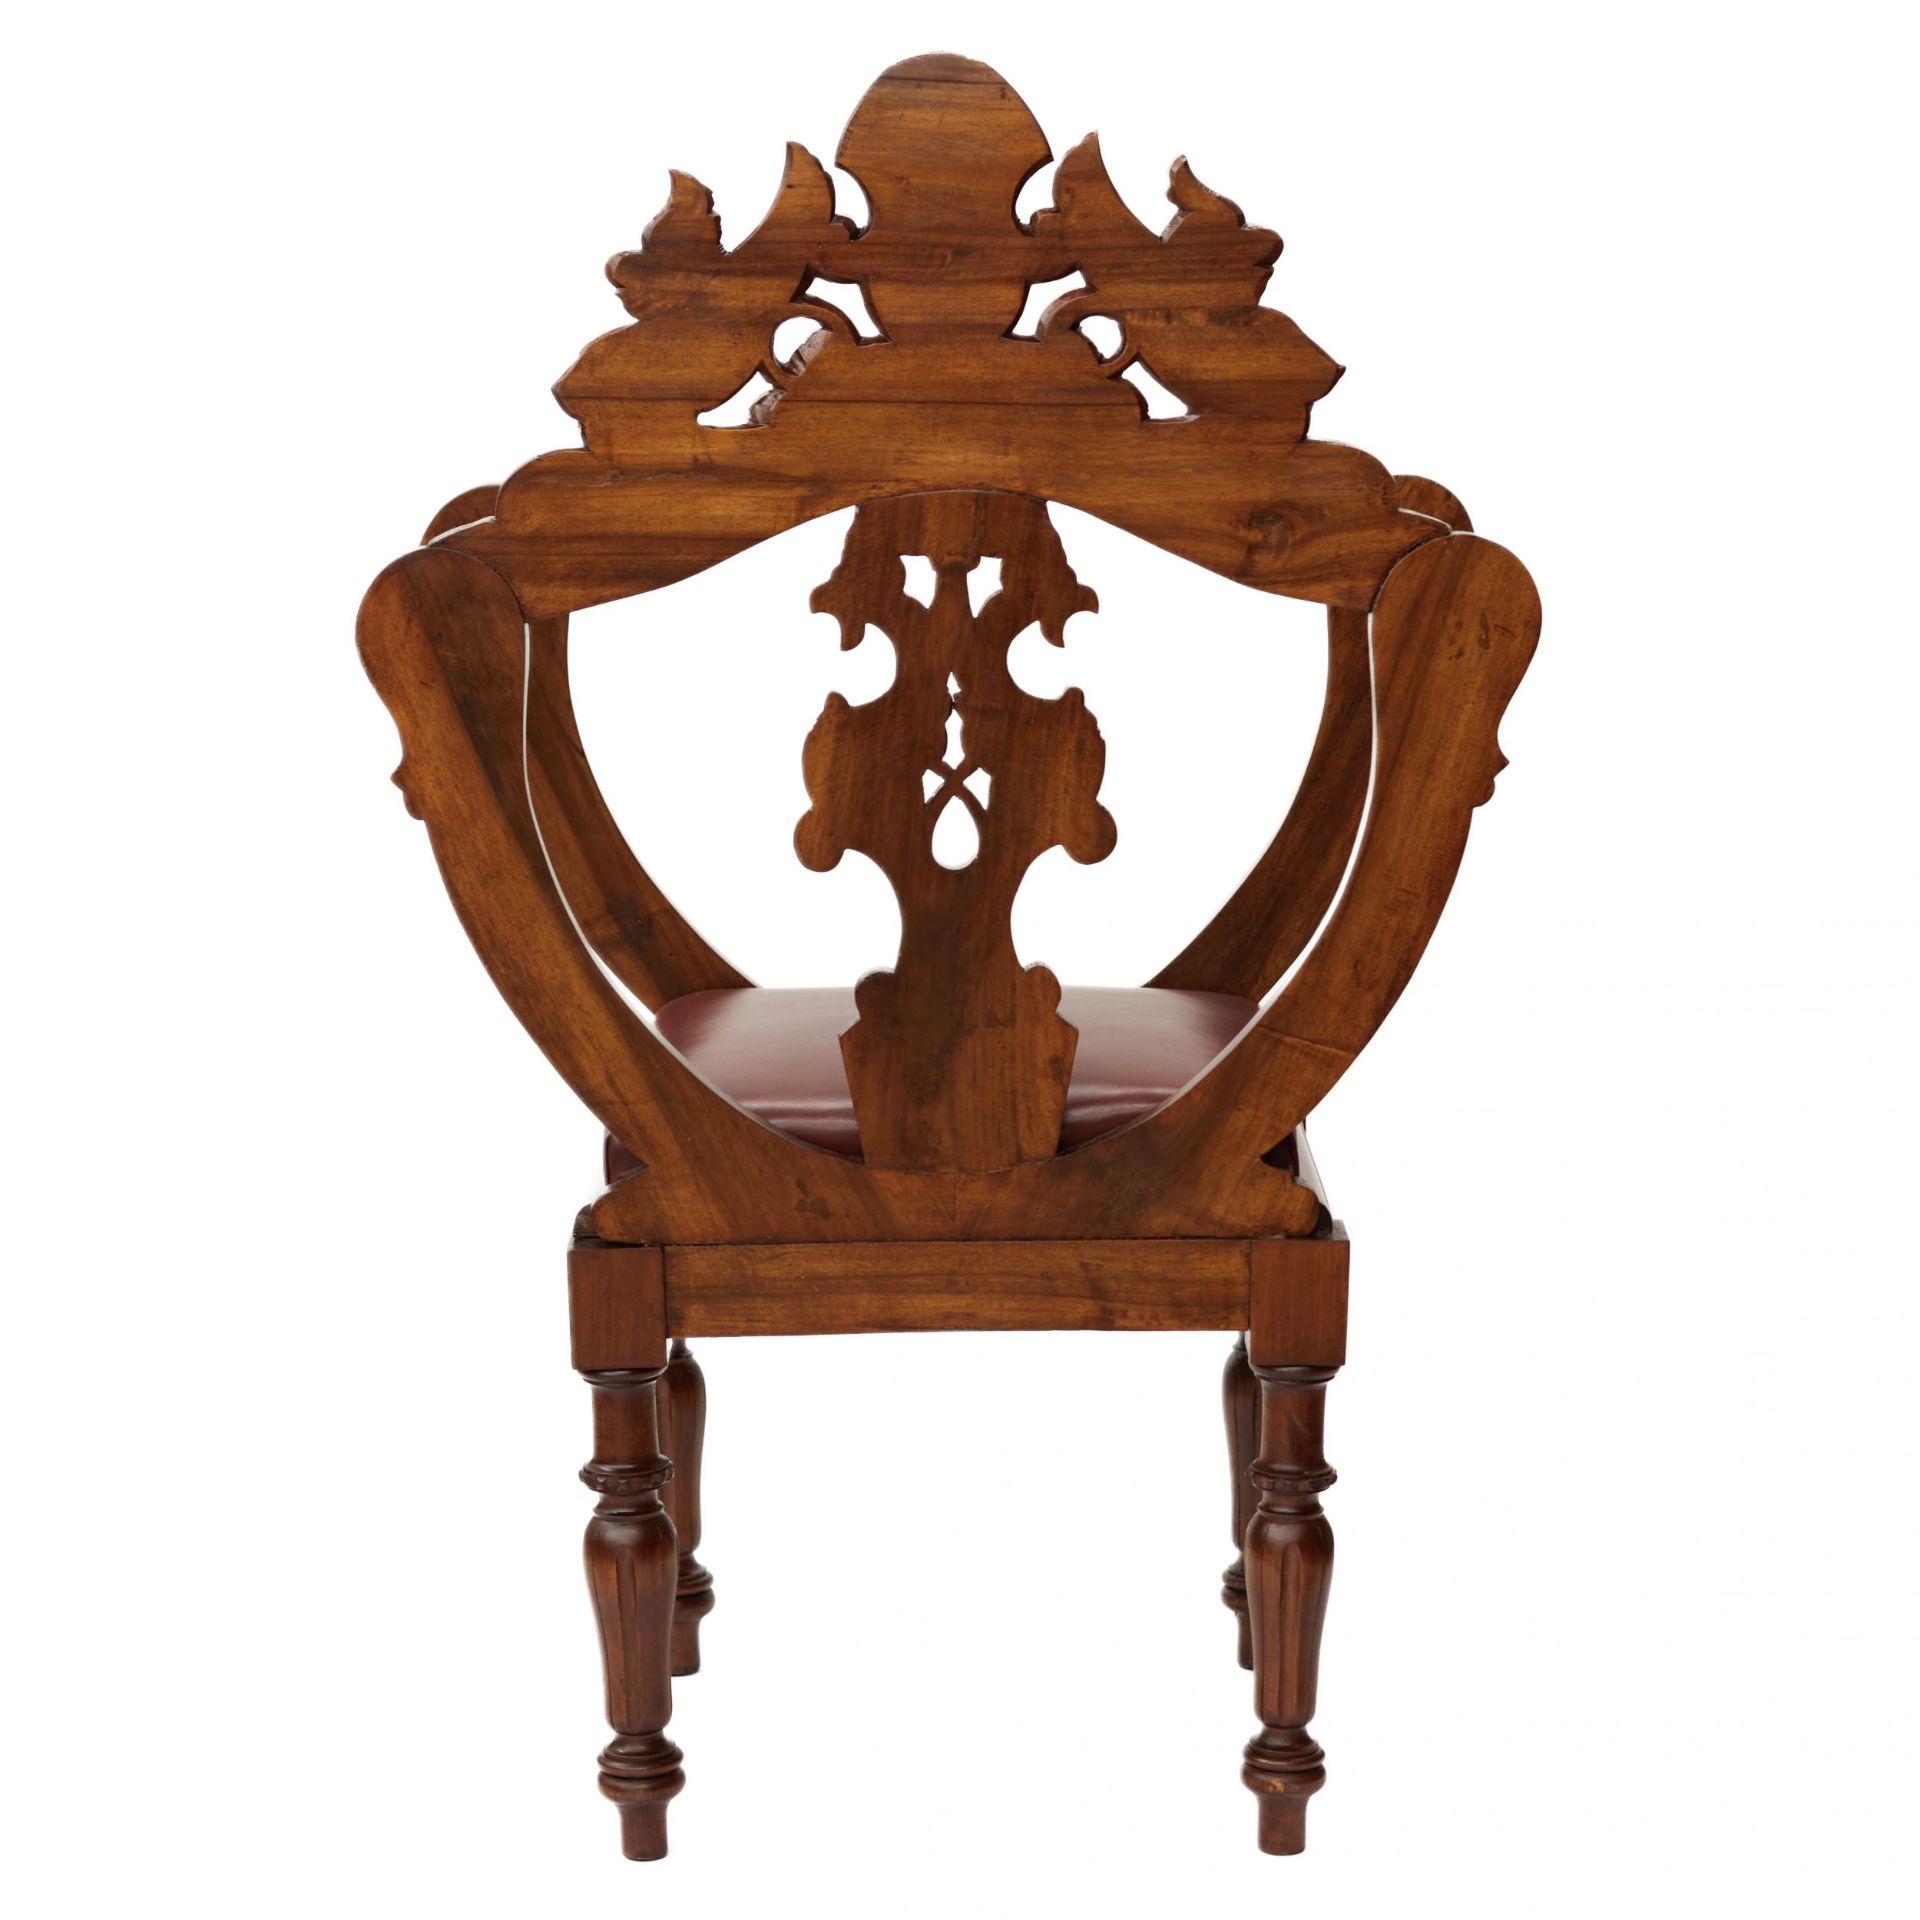 Carved, richly decorated walnut chair. 19th century - Image 5 of 6